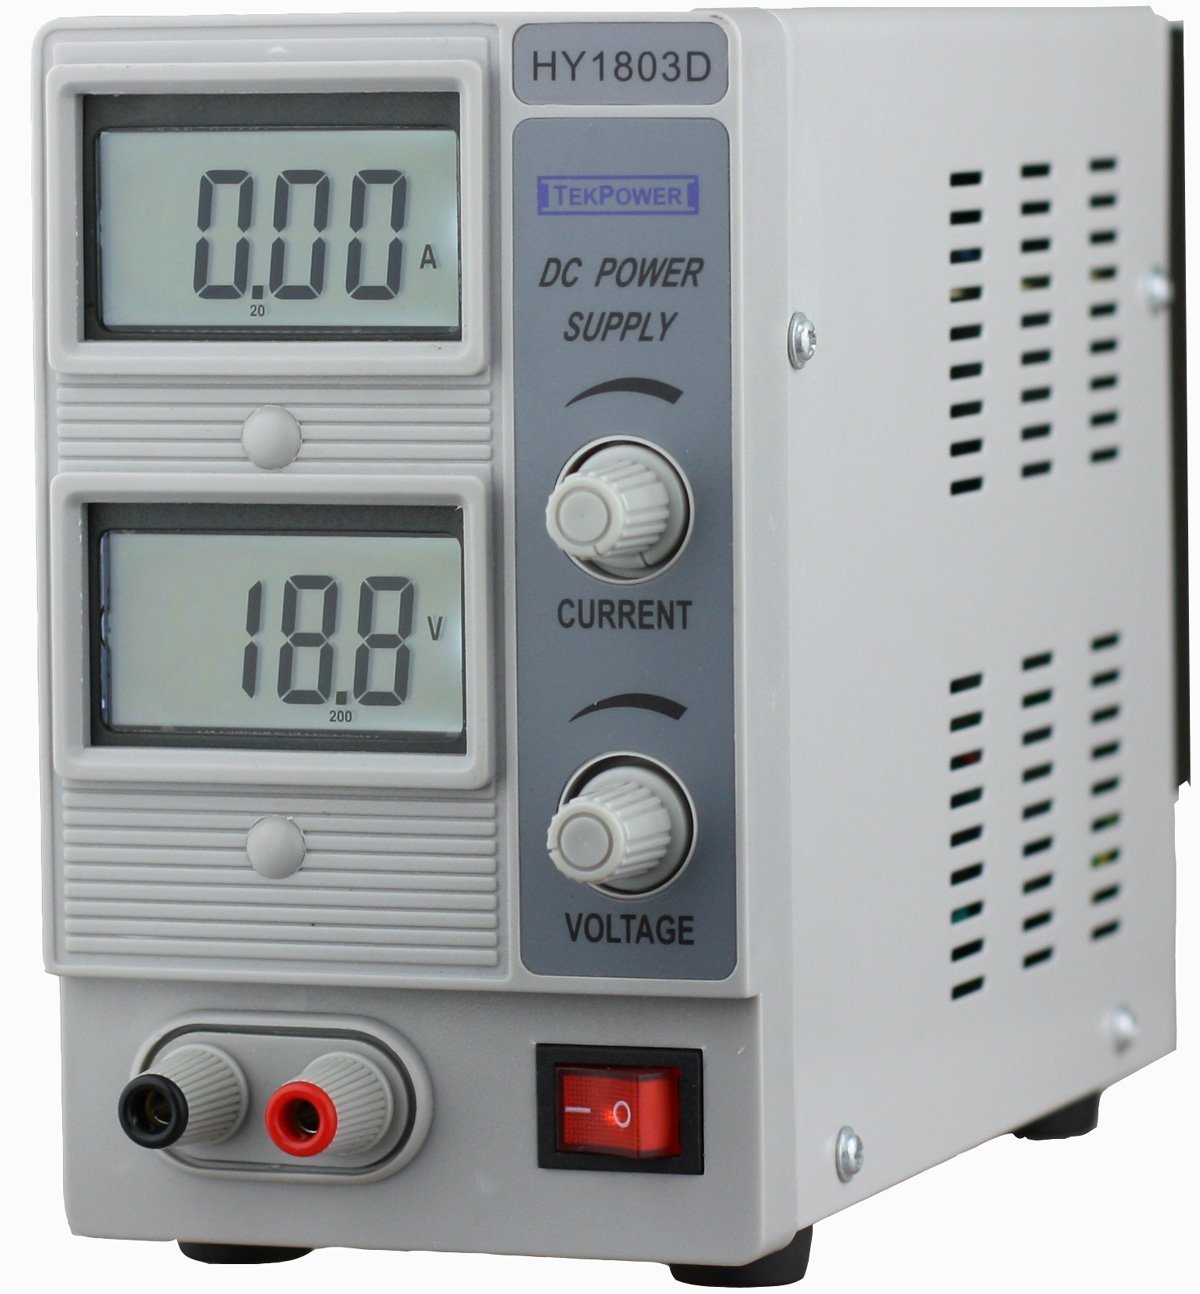 HY1803D Power Supply Variable DC Tekpower 0-18V, 0-3A.